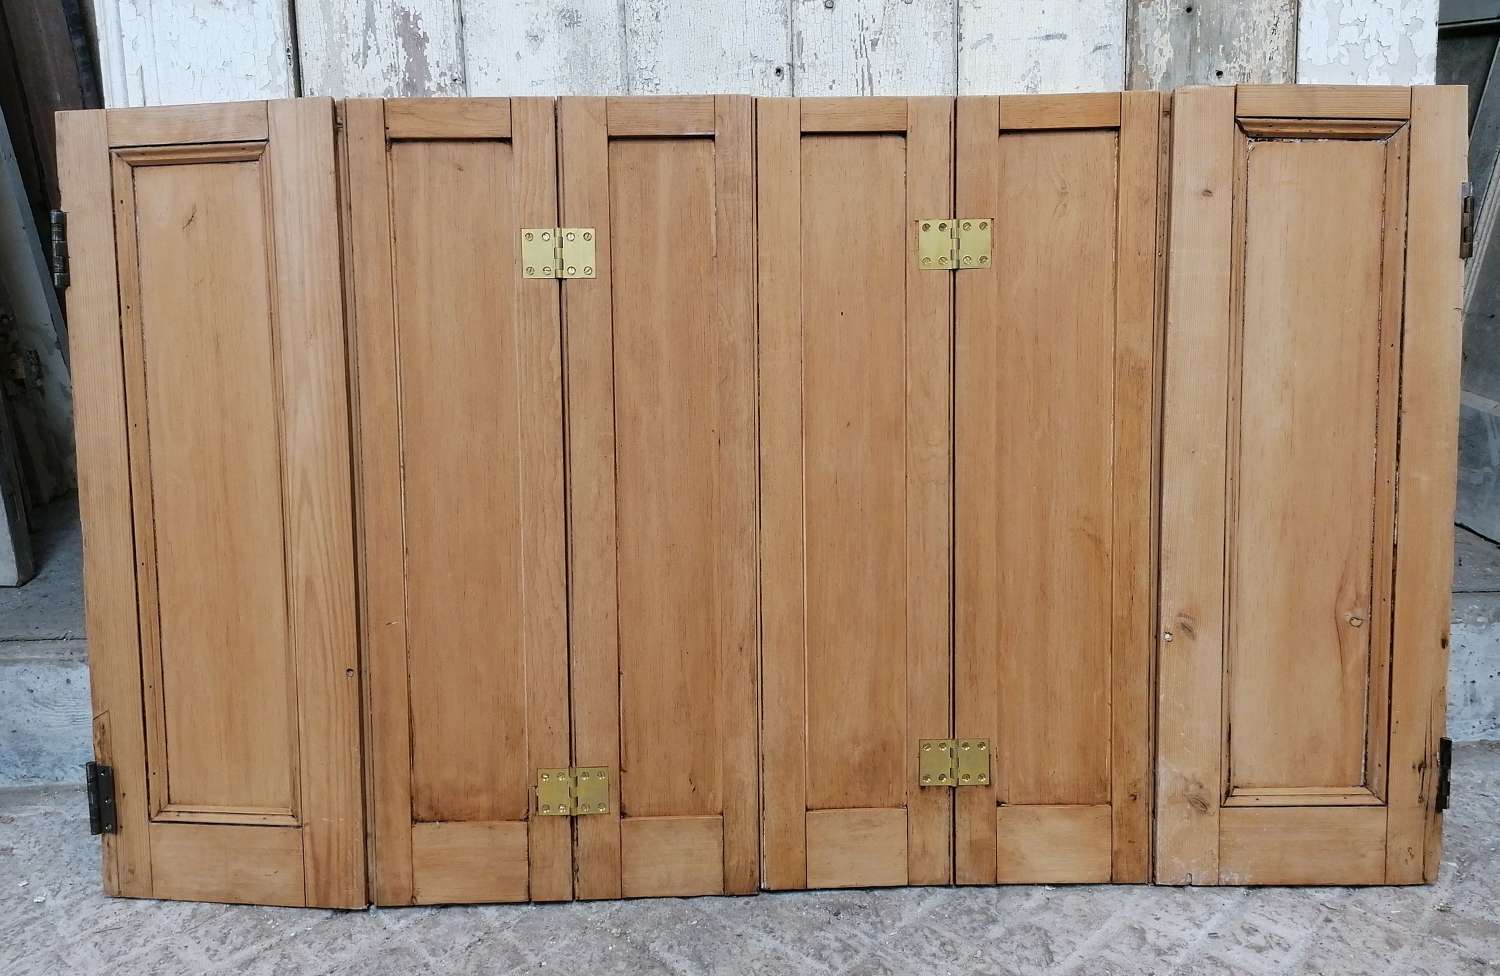 CS0053 A PAIR OF RECLAIMED STRIPPED PINE WAXED WINDOW SHUTTERS